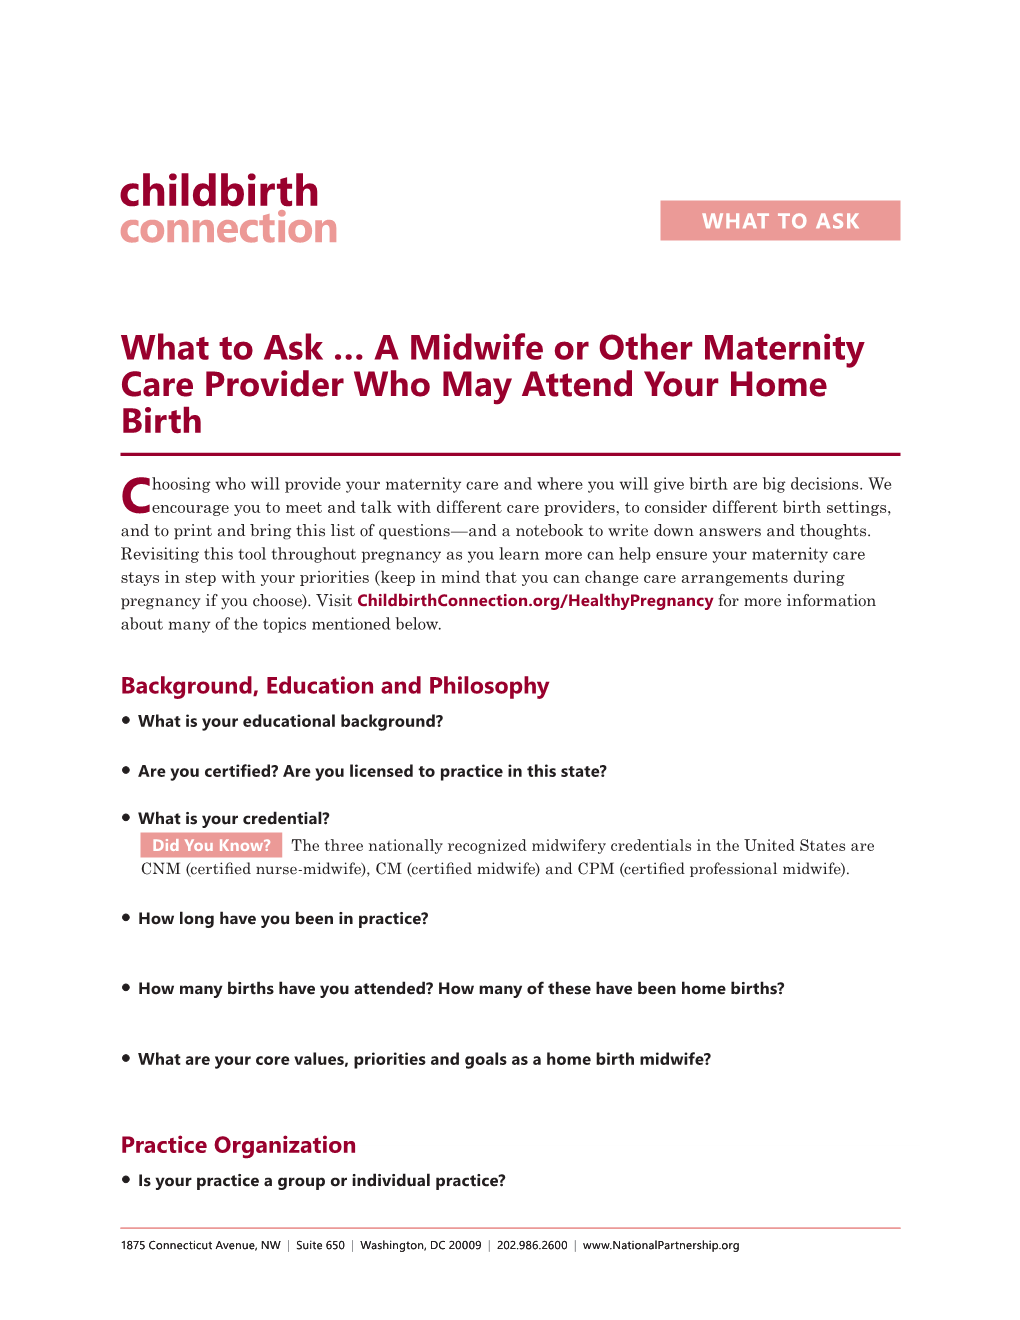 What to Ask … a Midwife Or Other Maternity Care Provider Who May Attend Your Home Birth